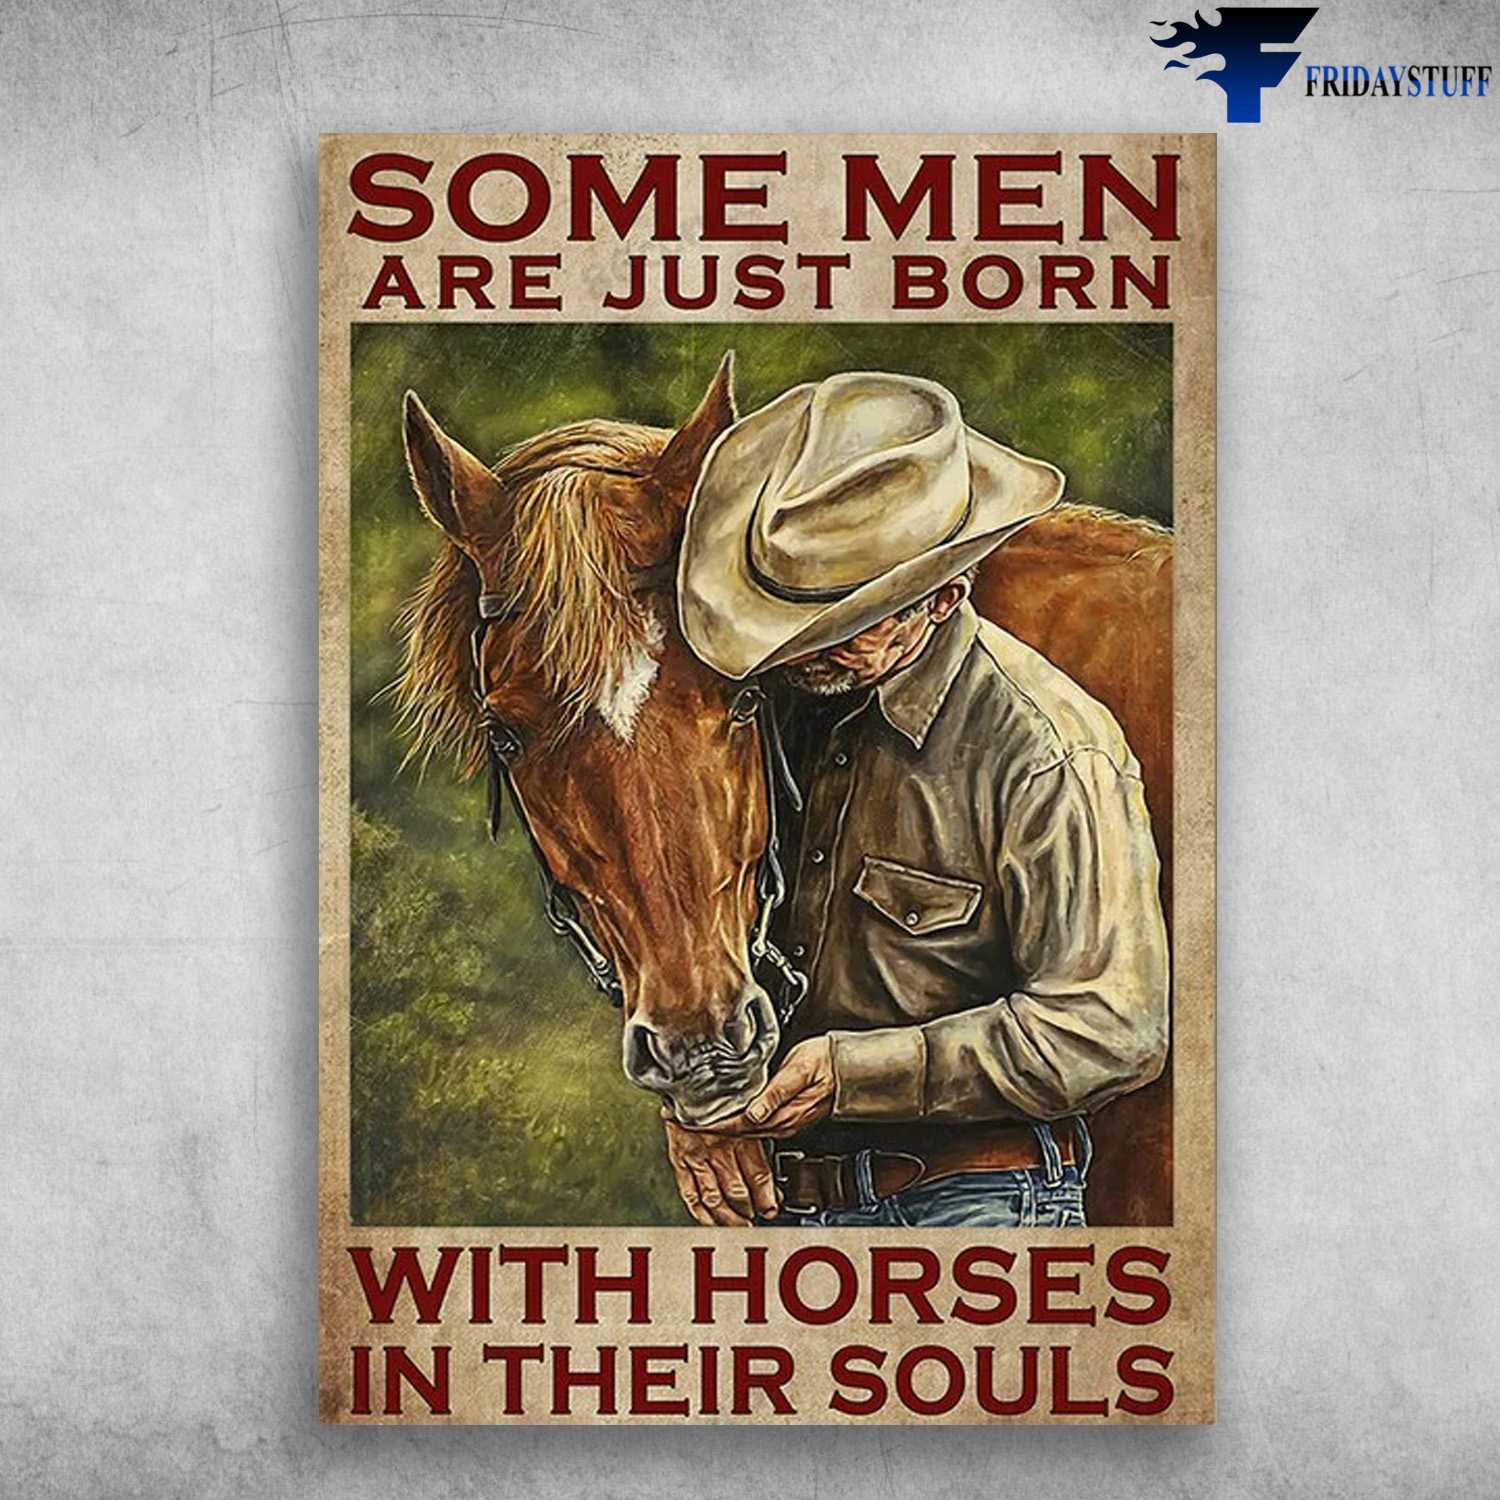 Old Man And Horse, Horse Lover, Some Men Are Just Born, With Horses In Their Souls